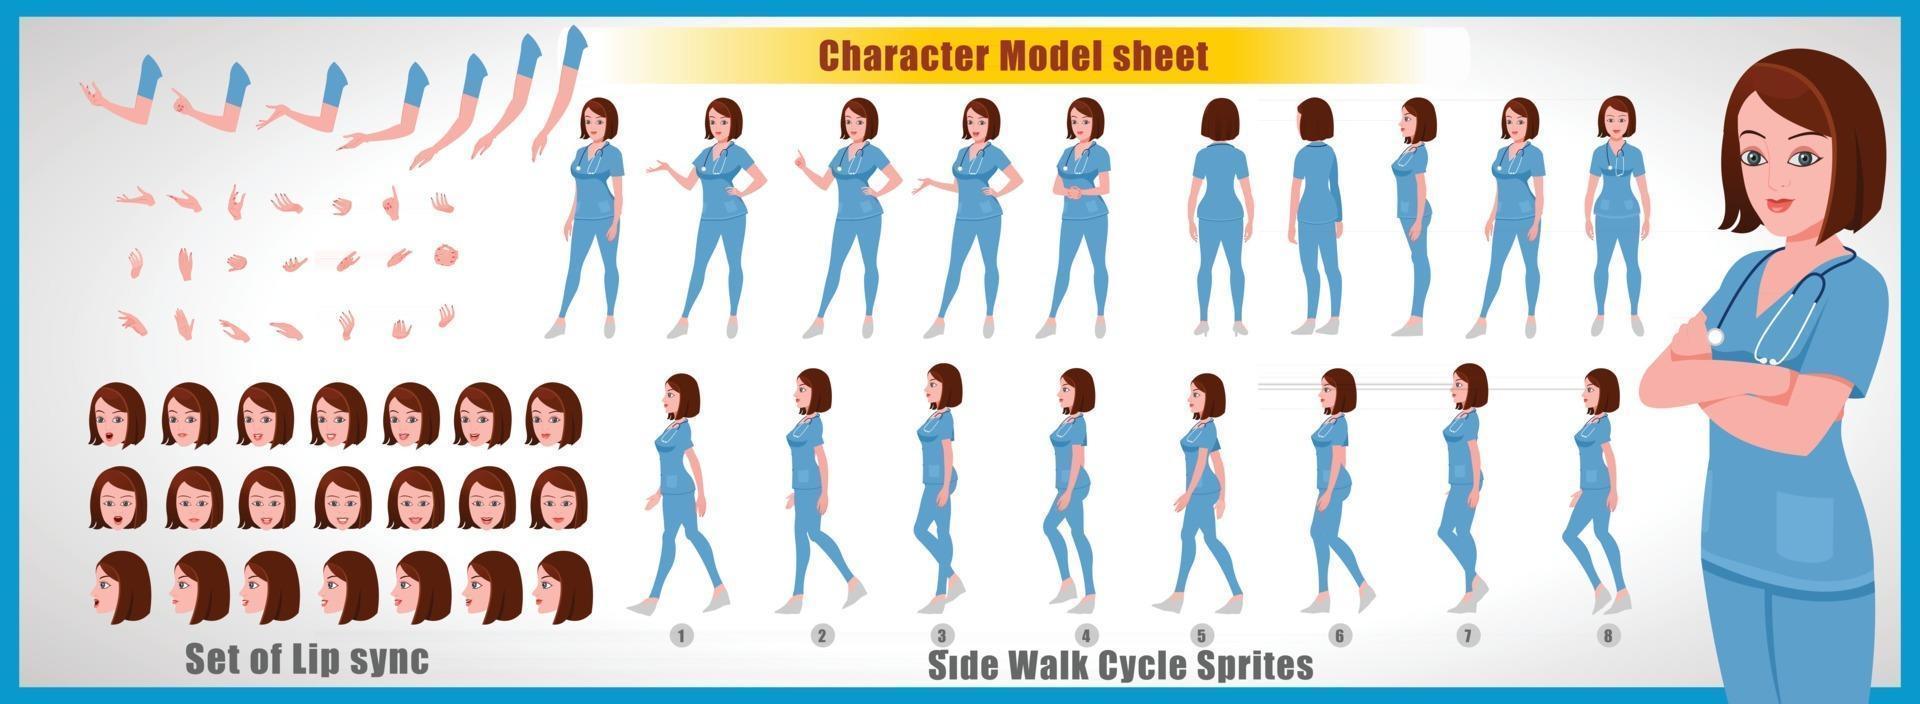 Doctor Girl Character Design Model Sheet Girl Character design Front side back view and explainer animation poses Character set with lip sync Animation sequence of all front Back and side walk cycle animation sequences vector